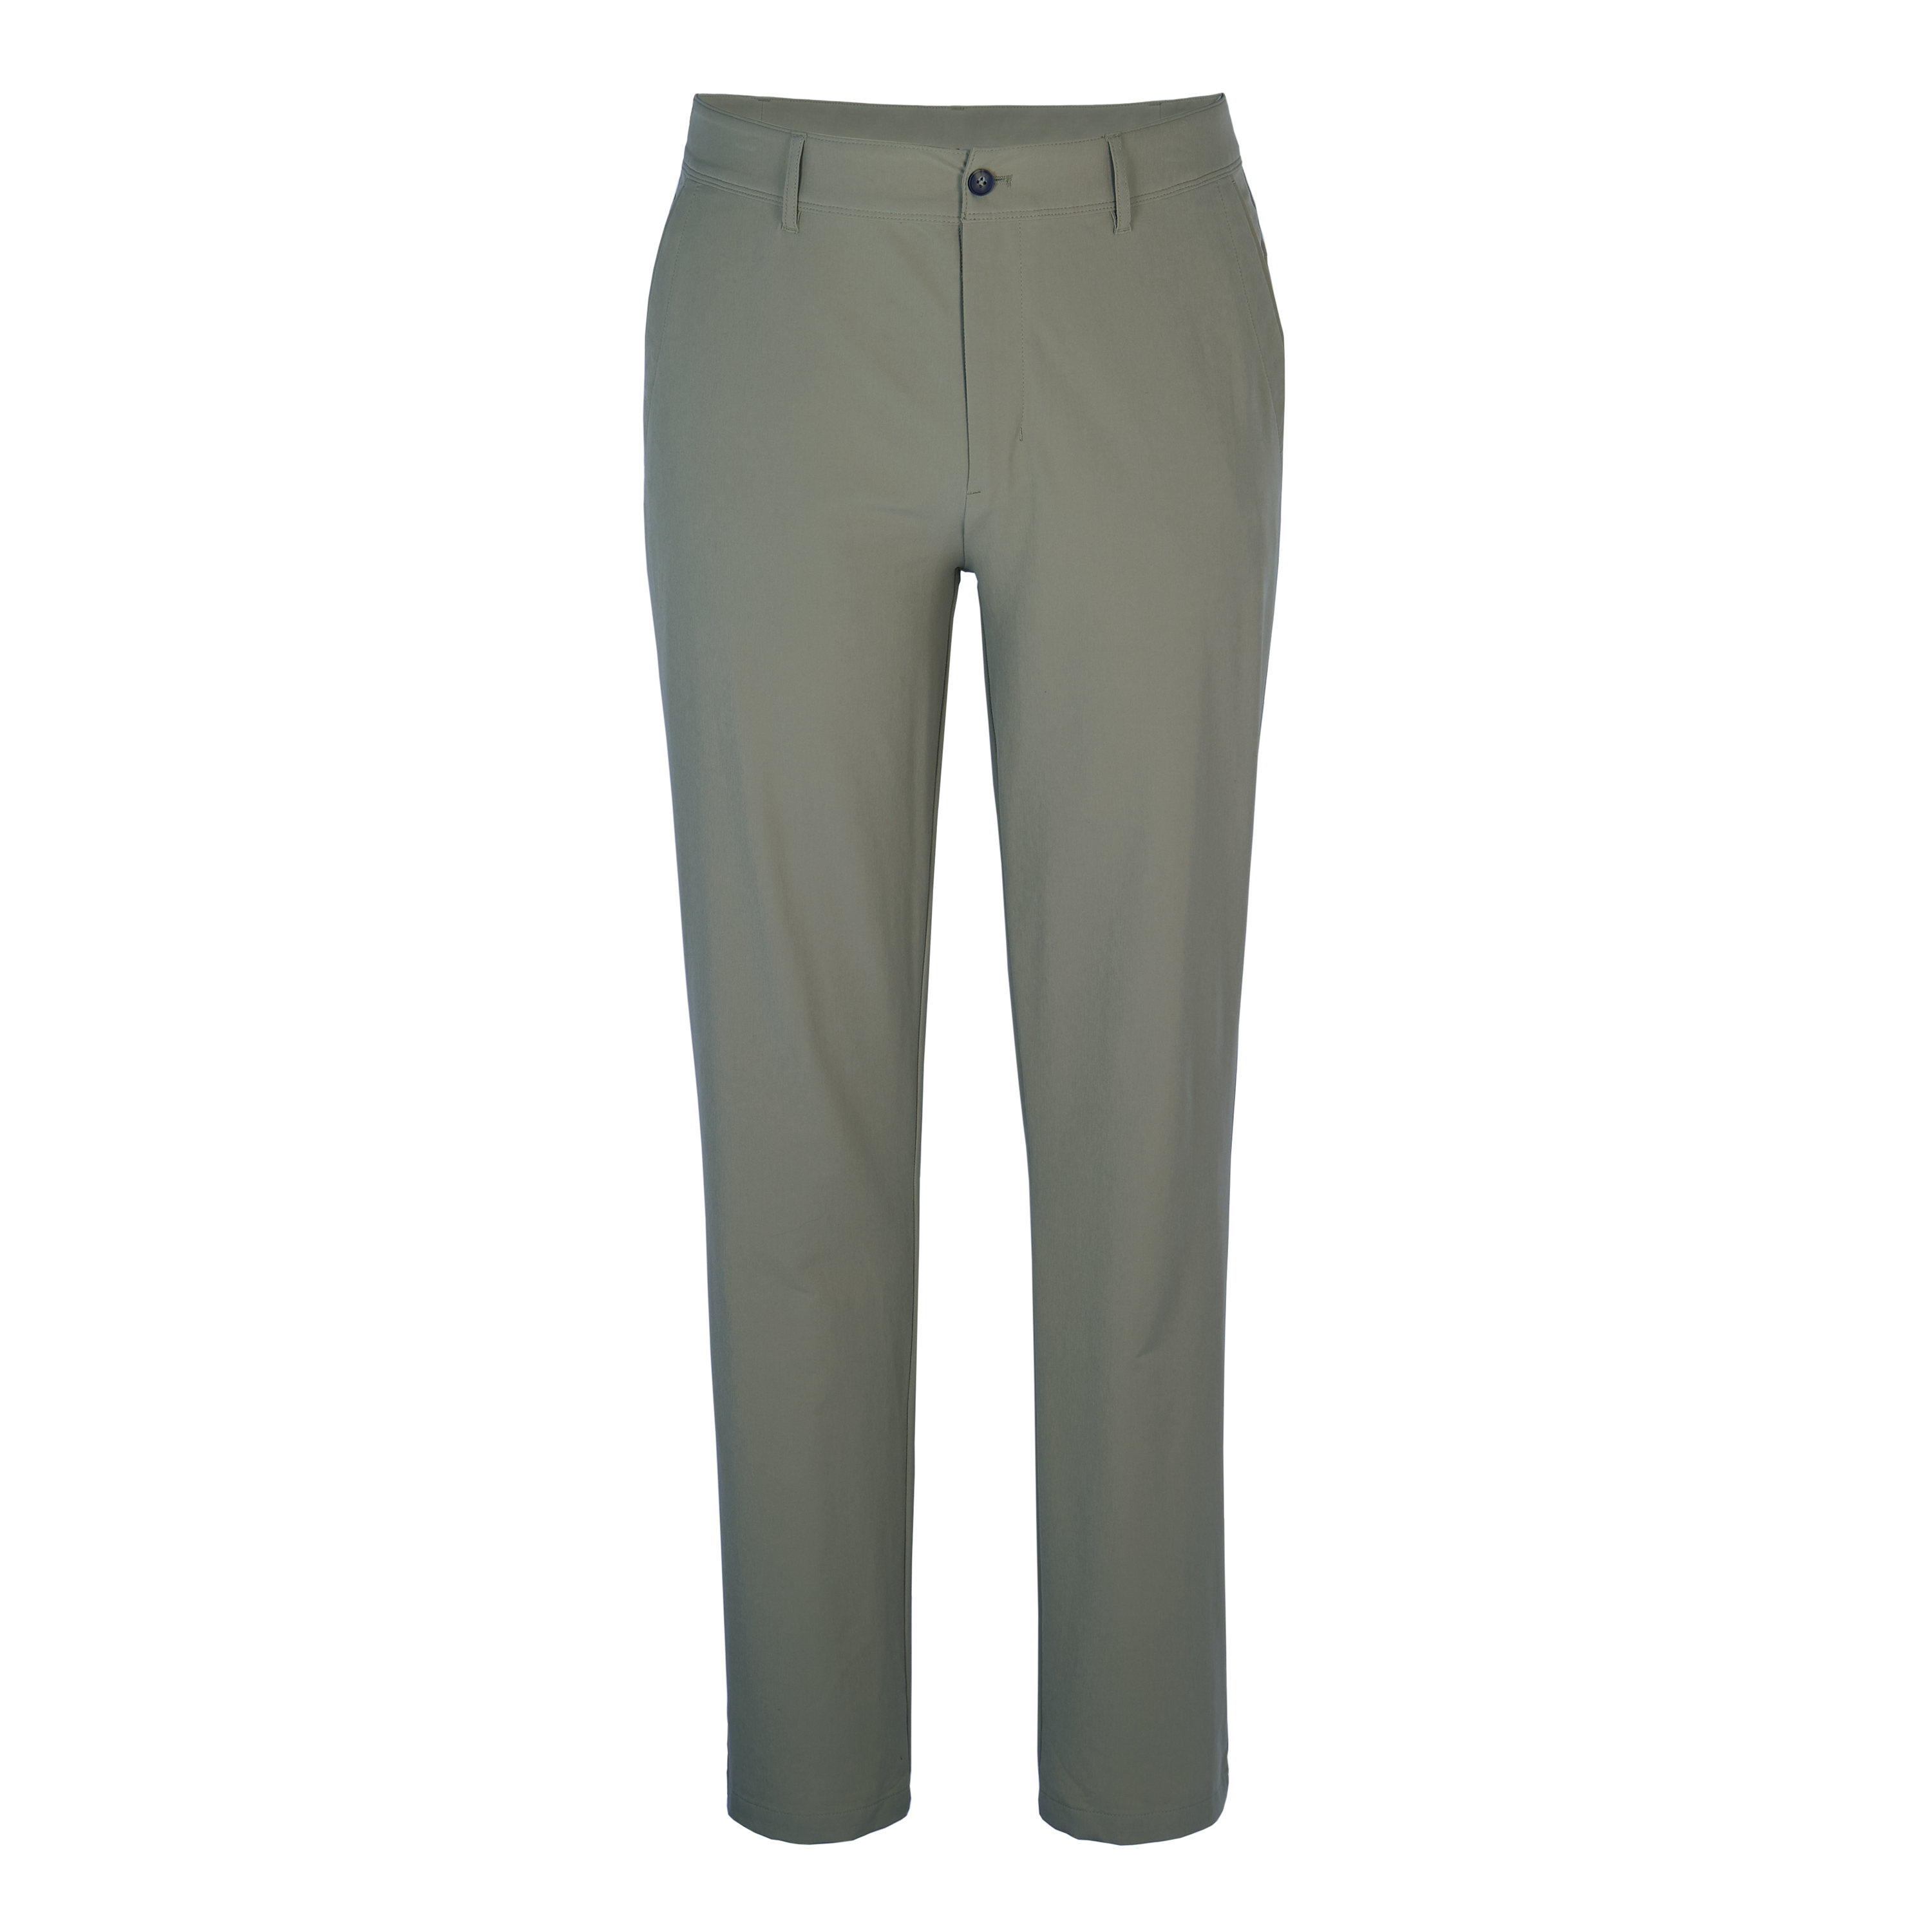 Rohan Men's Sentry Trousers Size 34 